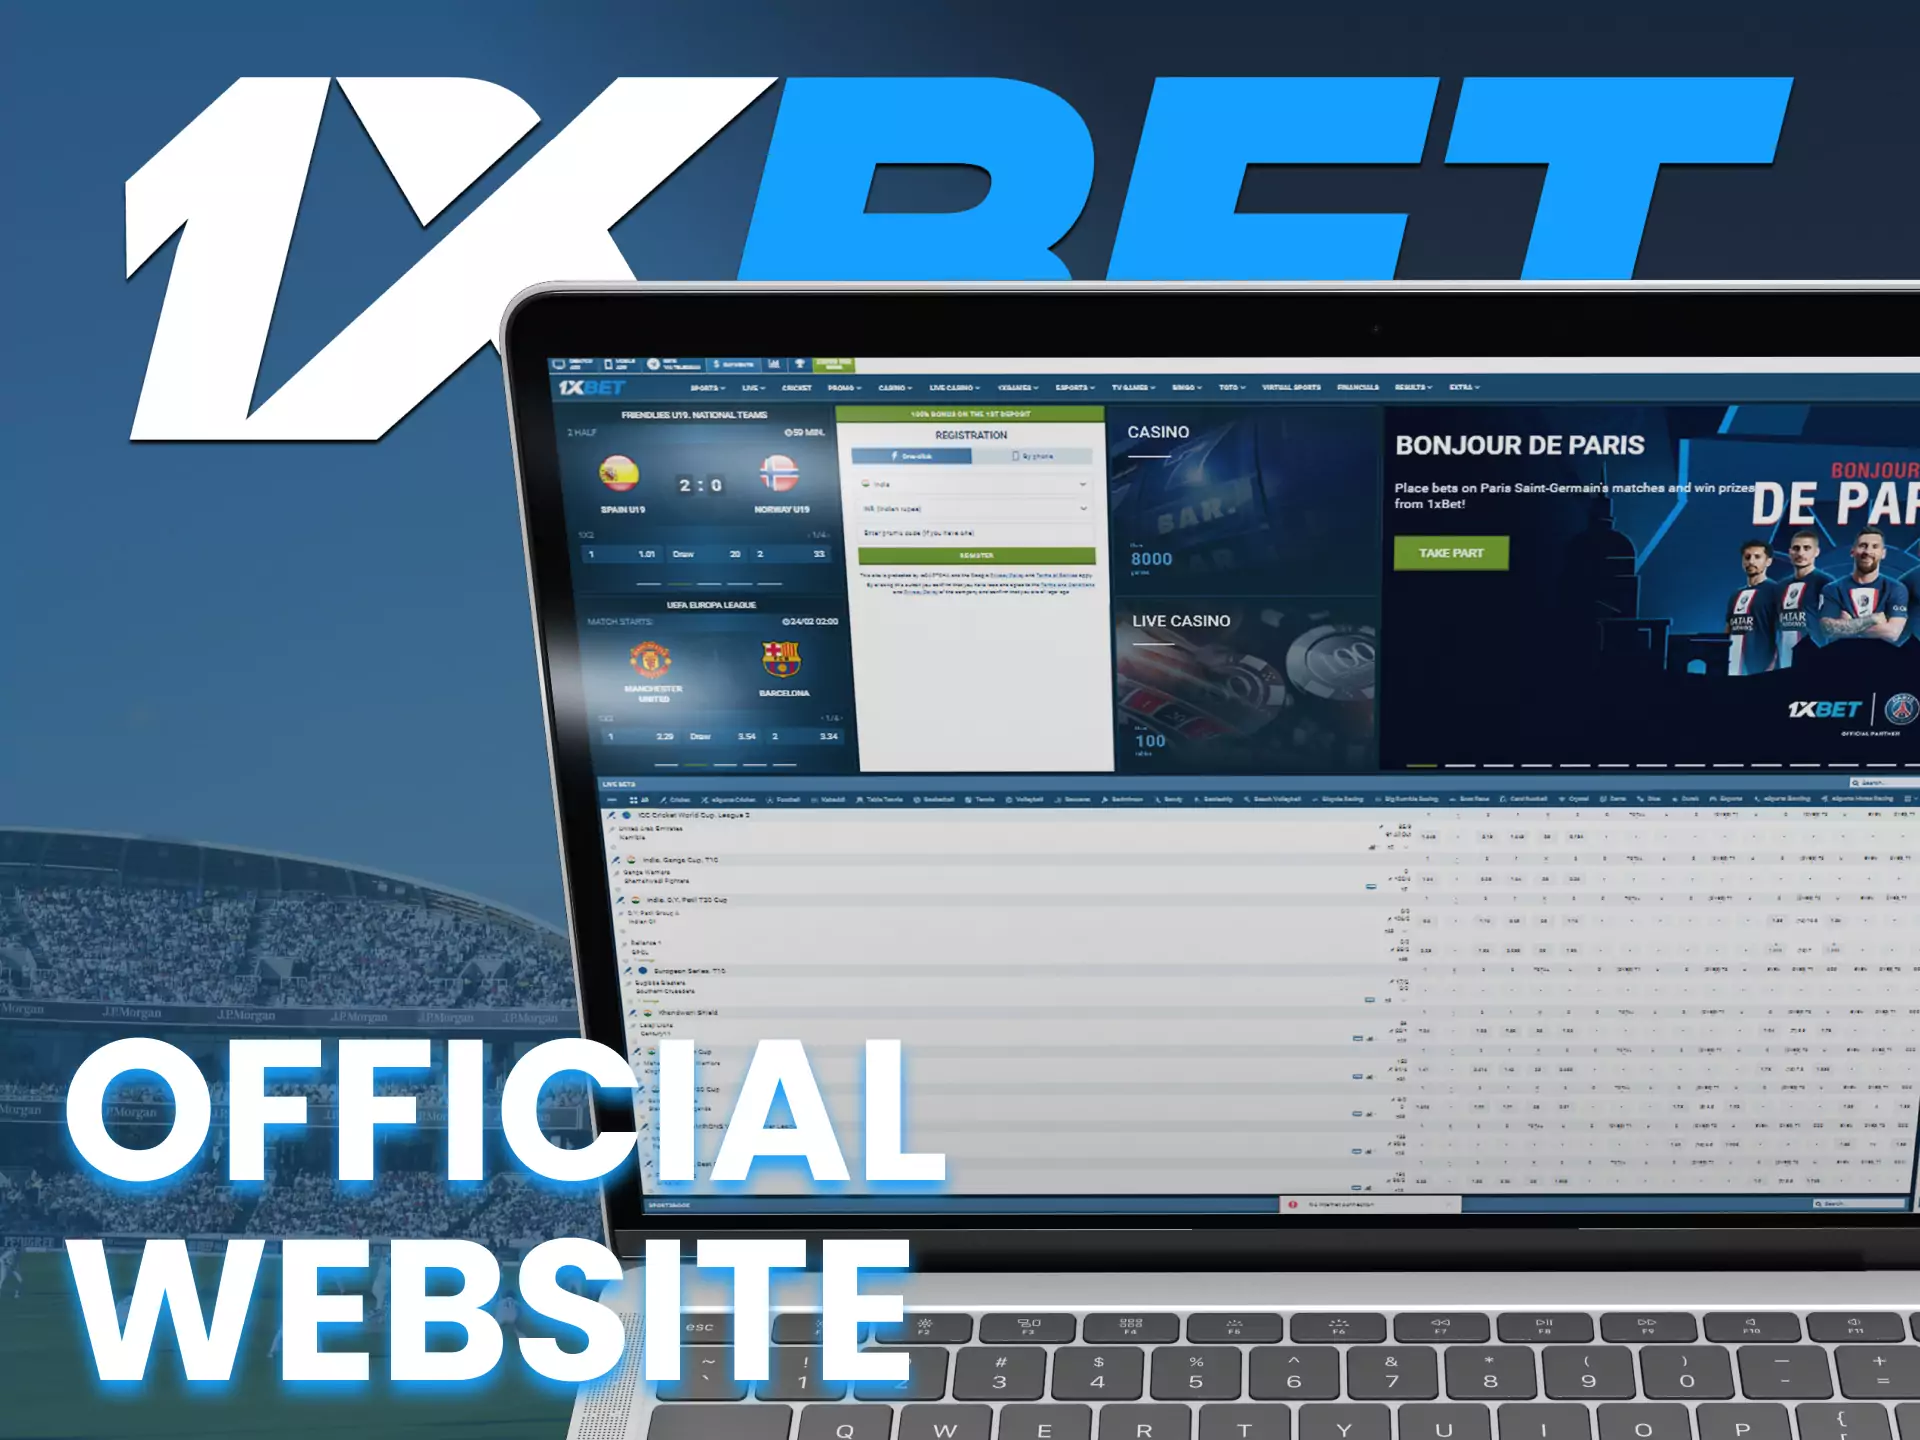 Visit the official 1XBET website and place a bet.